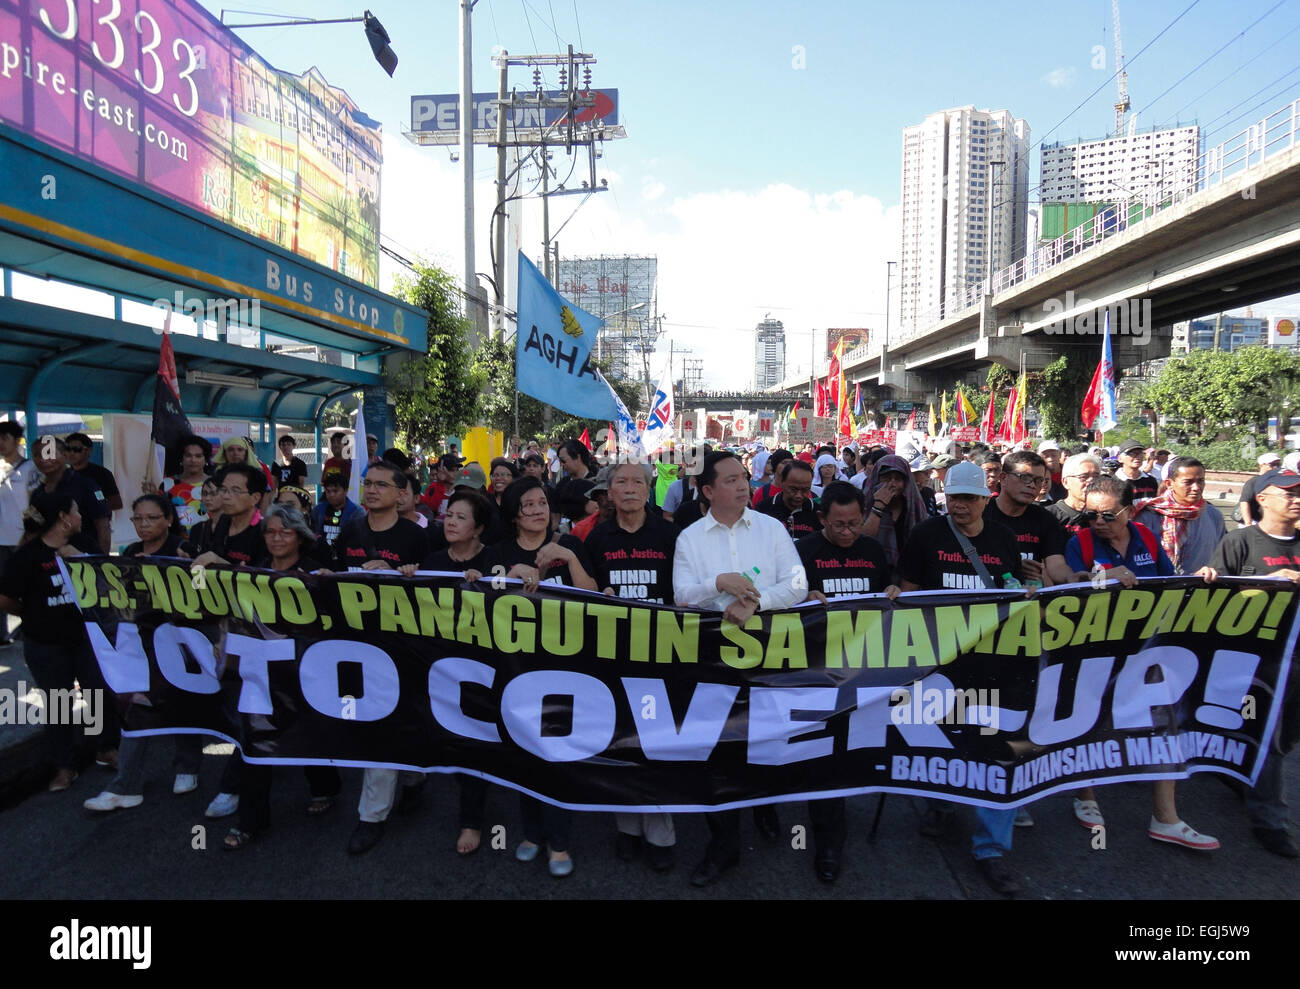 Militant protesters march on the historic EDSA highway, as they walk to the Philippine National Police headquarters, calling for President Benigno Aquino III to be held accountable on the Mamasapano incident, during a rally at EDSA highway, held on the 29th anniversary of the 1986 People Power revolution. The protesters were blocked by police from reaching the police headquarters where they intended to form a 'human chain' from the headquarters to EDSA Shrine. Credit:  Richard James Mendoza/Pacific Press/Alamy Live News Stock Photo